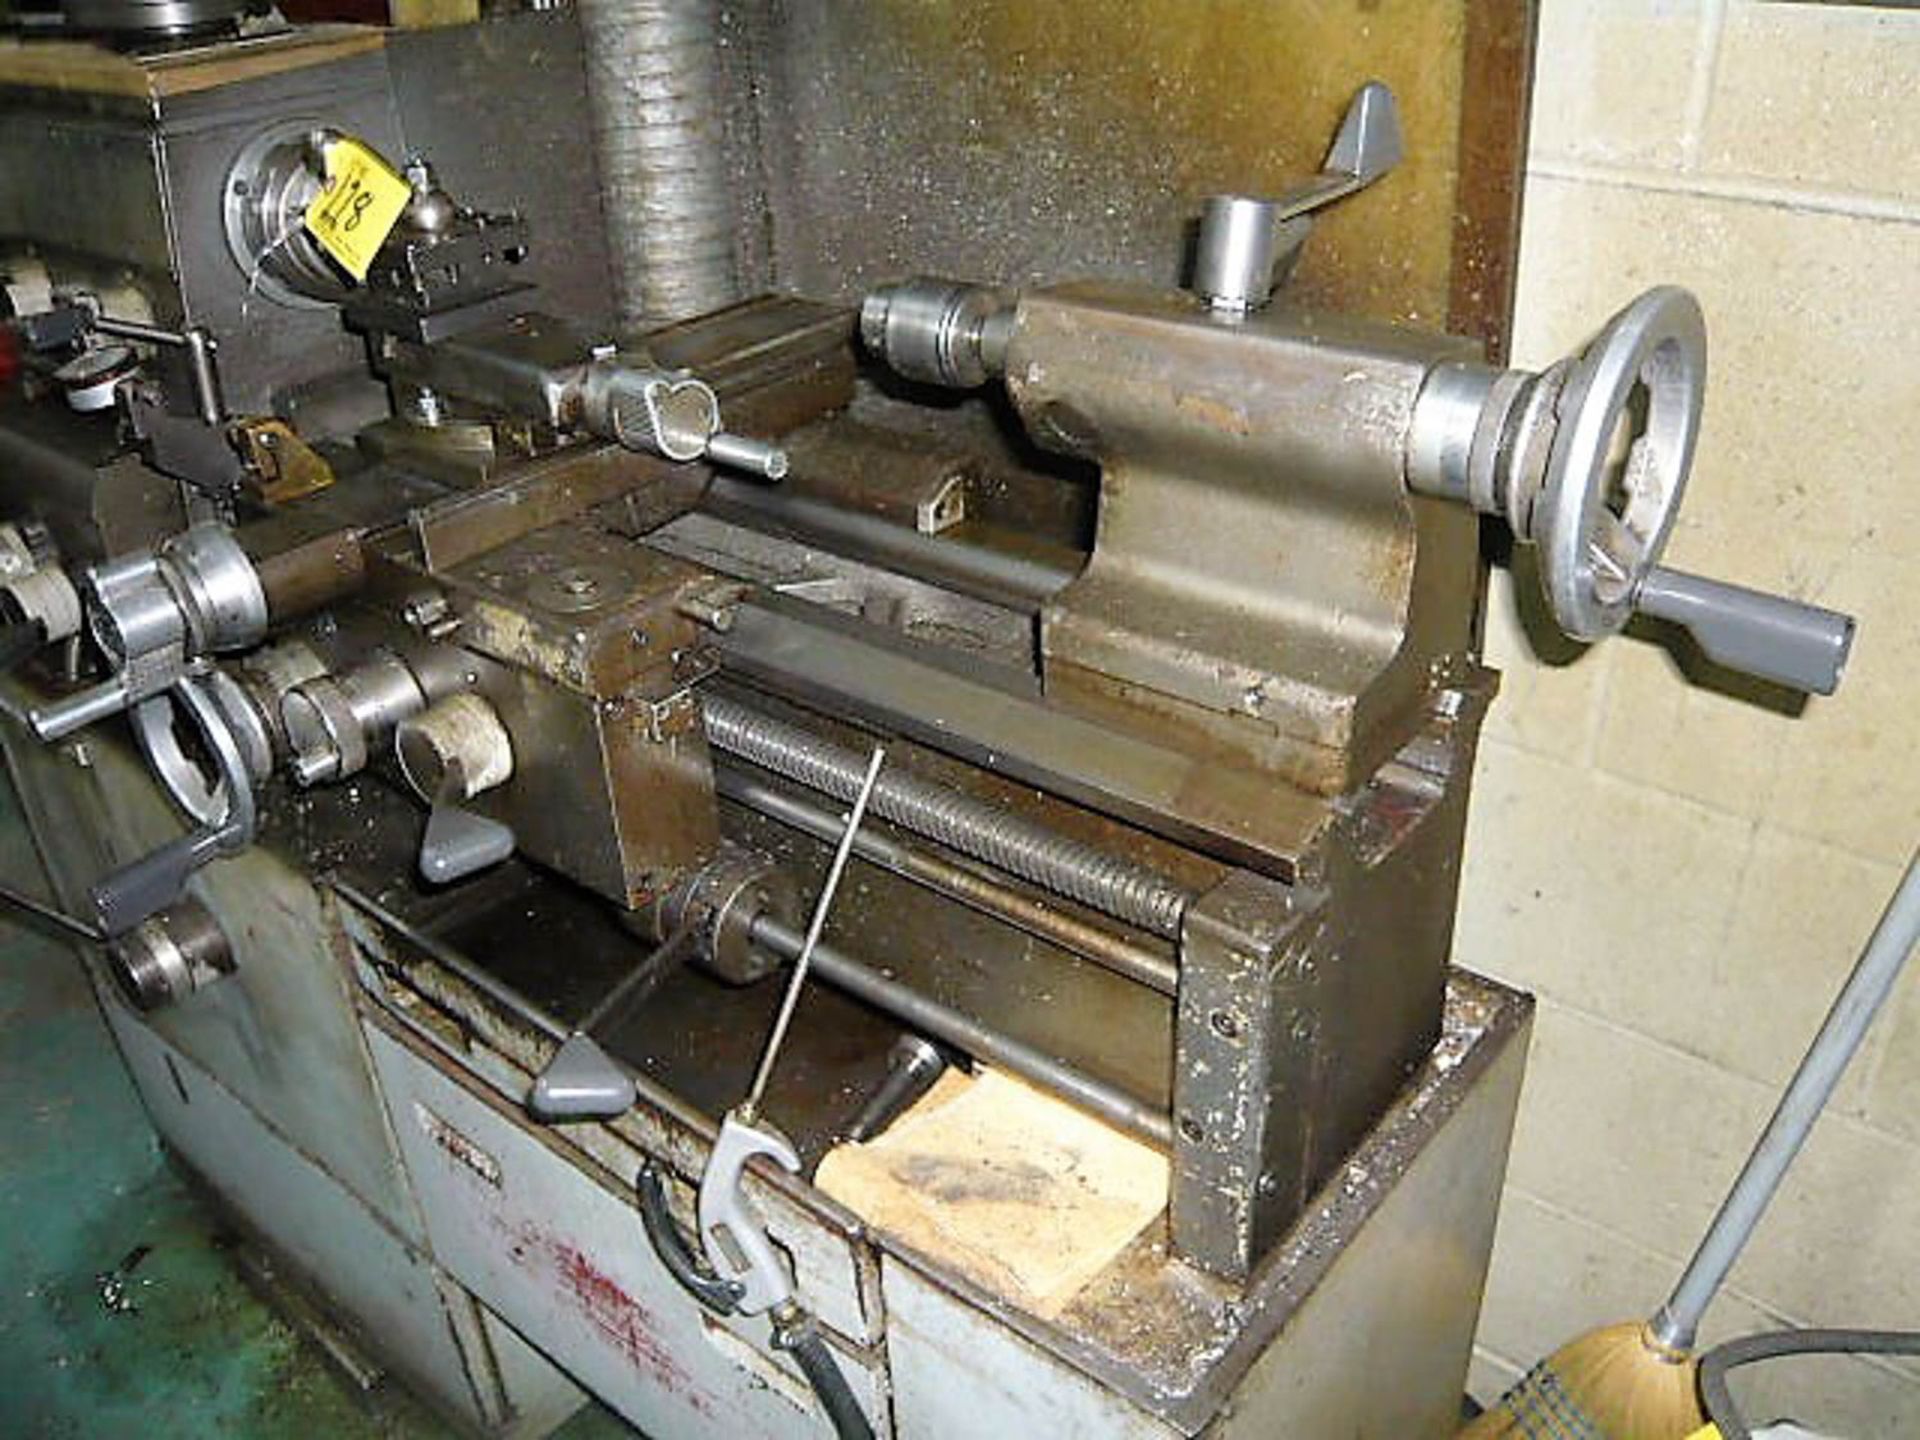 MADE IN BELGIUM 12" X 20" LATHE, INCH / METRIC THREADING, TOOL POST, 5C COLLET CHUCK, 6" 3-JAW - Image 5 of 6